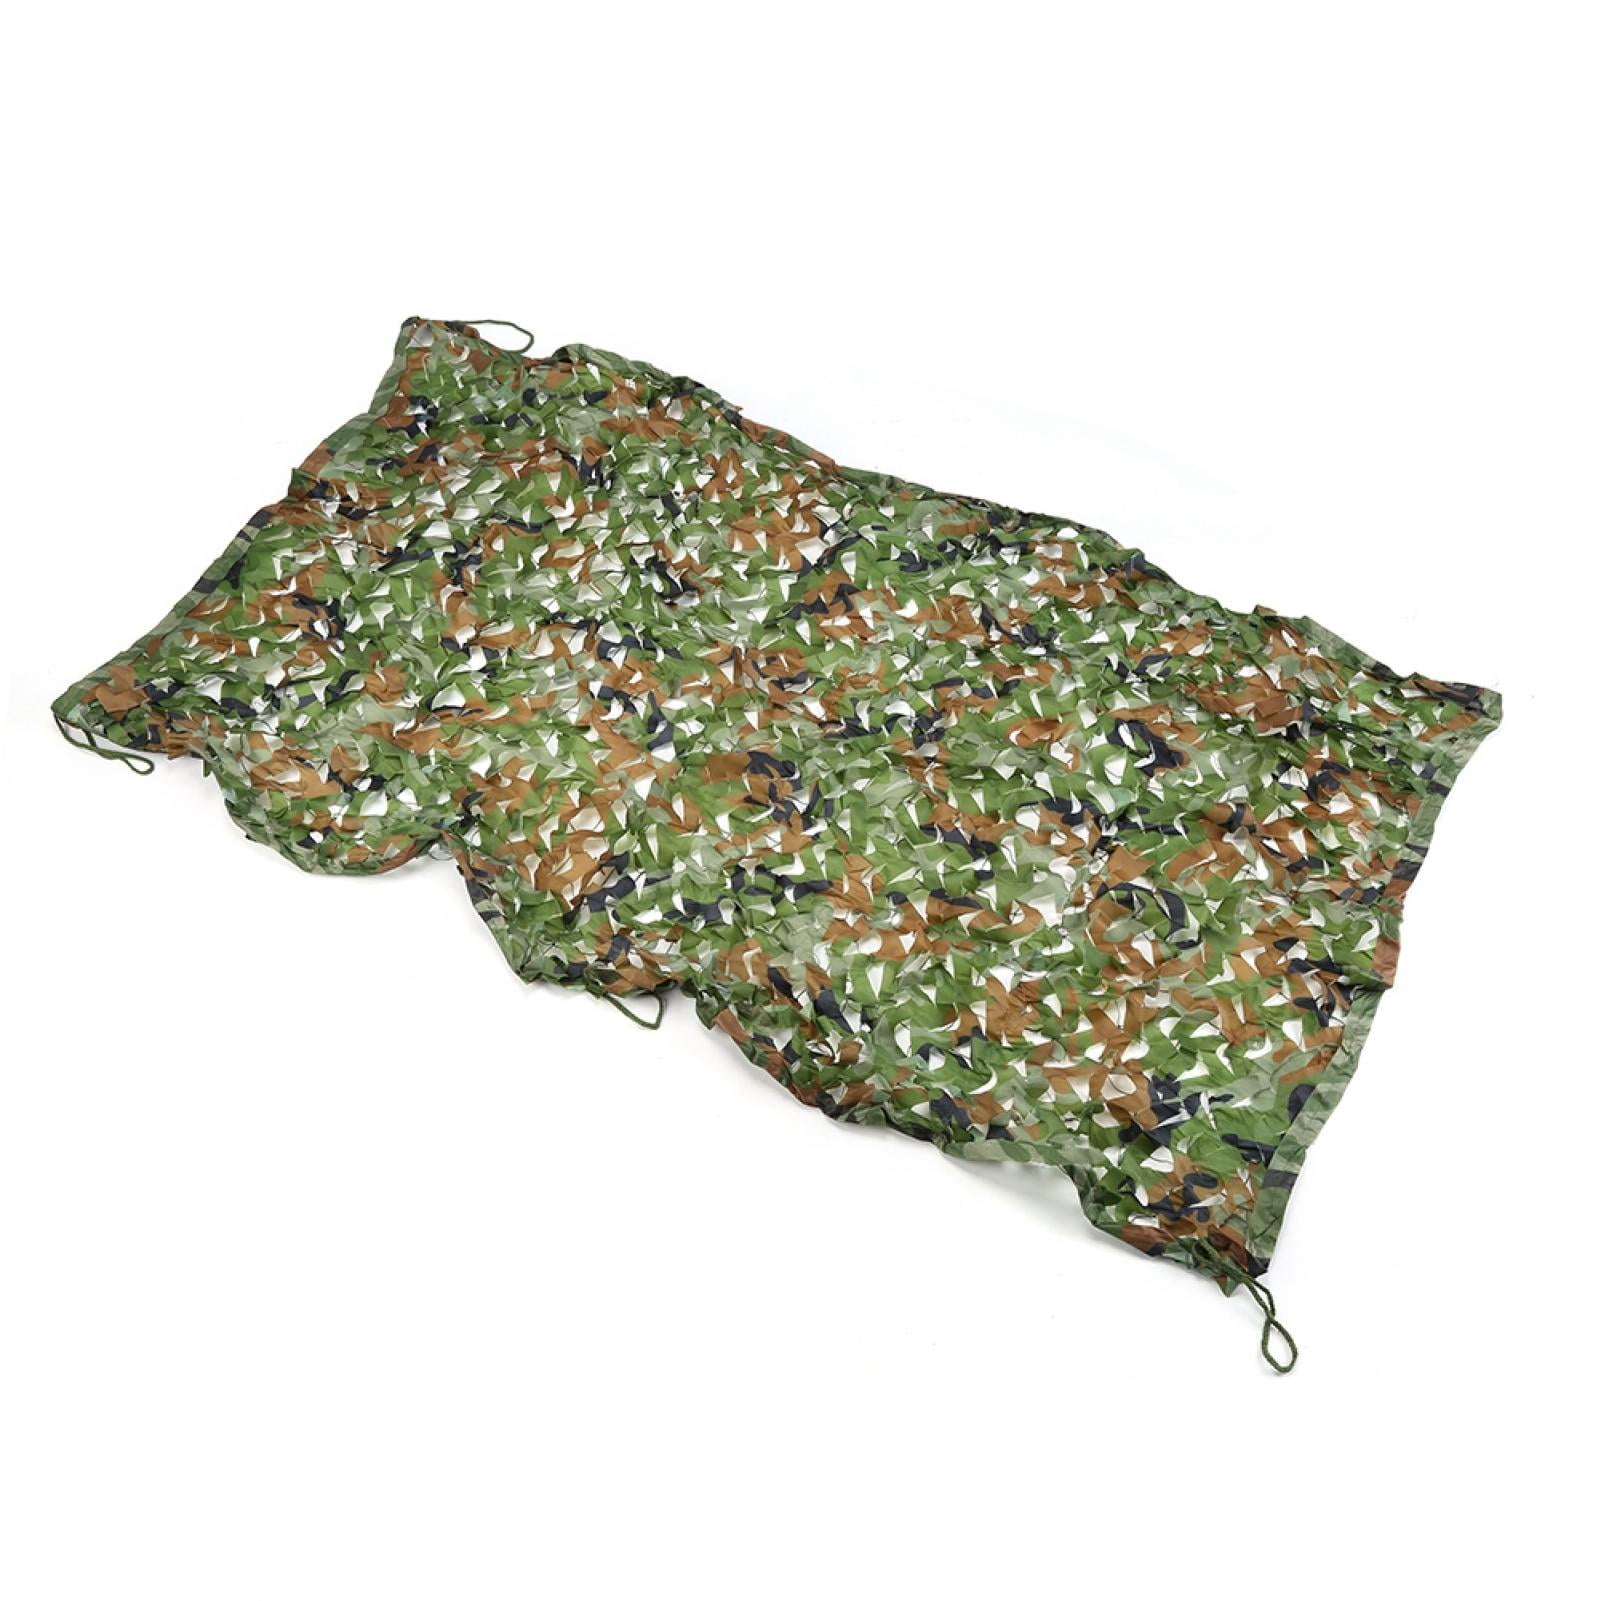 Camouflage Camo Net Netting Hide Military Army Woodland Camp Party New 230x80cm 